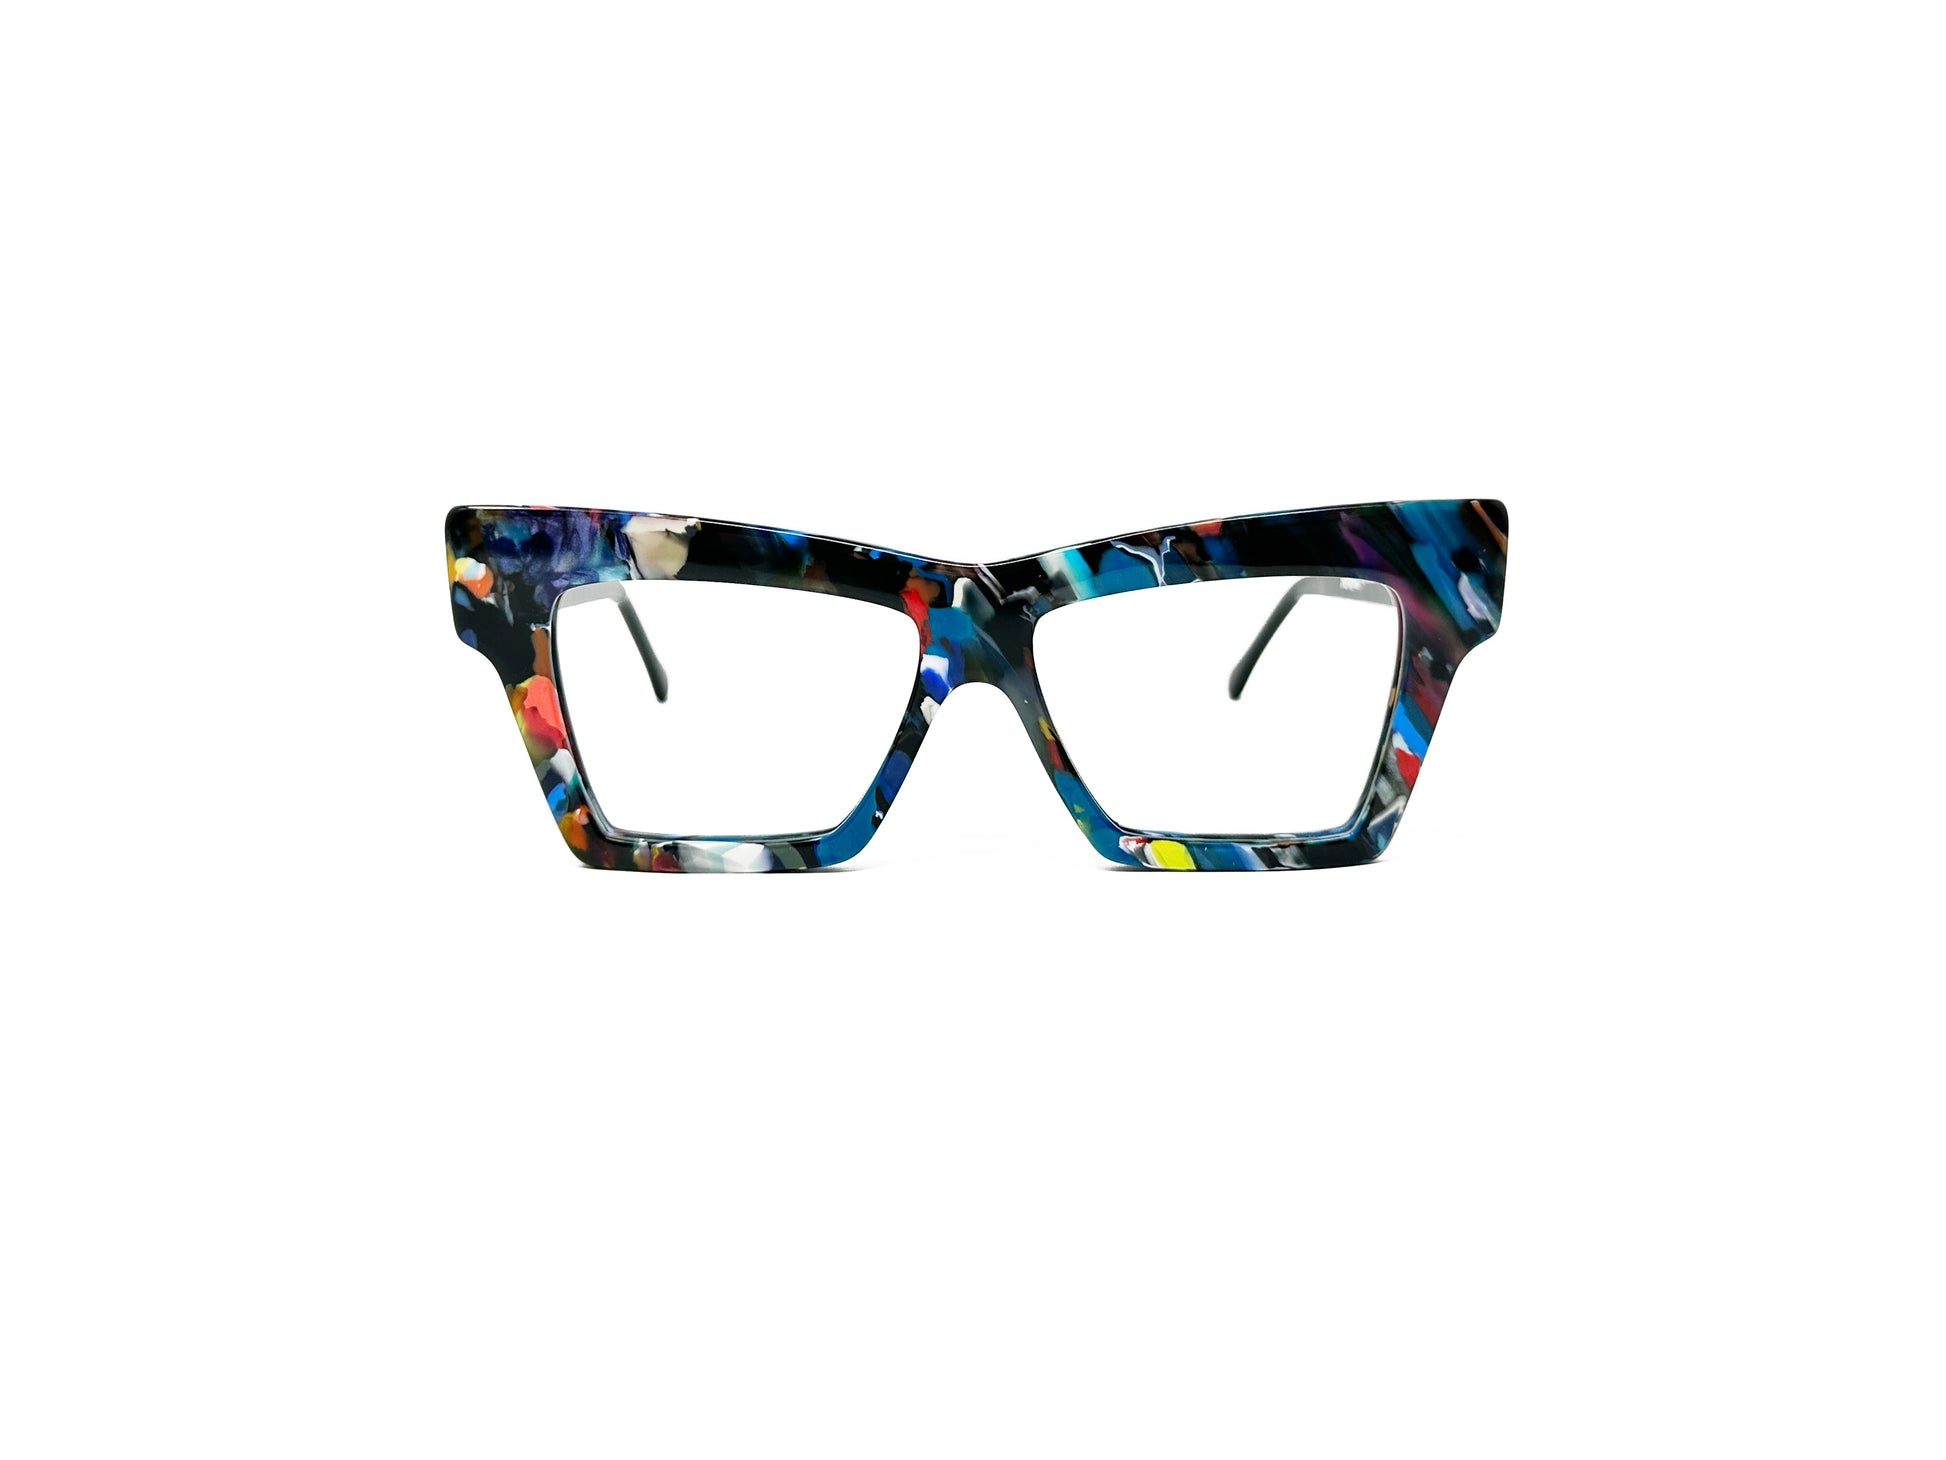 Viktlos recycled acetate optical frame. Upward angled rectangular frame. Model: RC007. Color: 02592, Multi-colored blue marble pattern. Front view. 